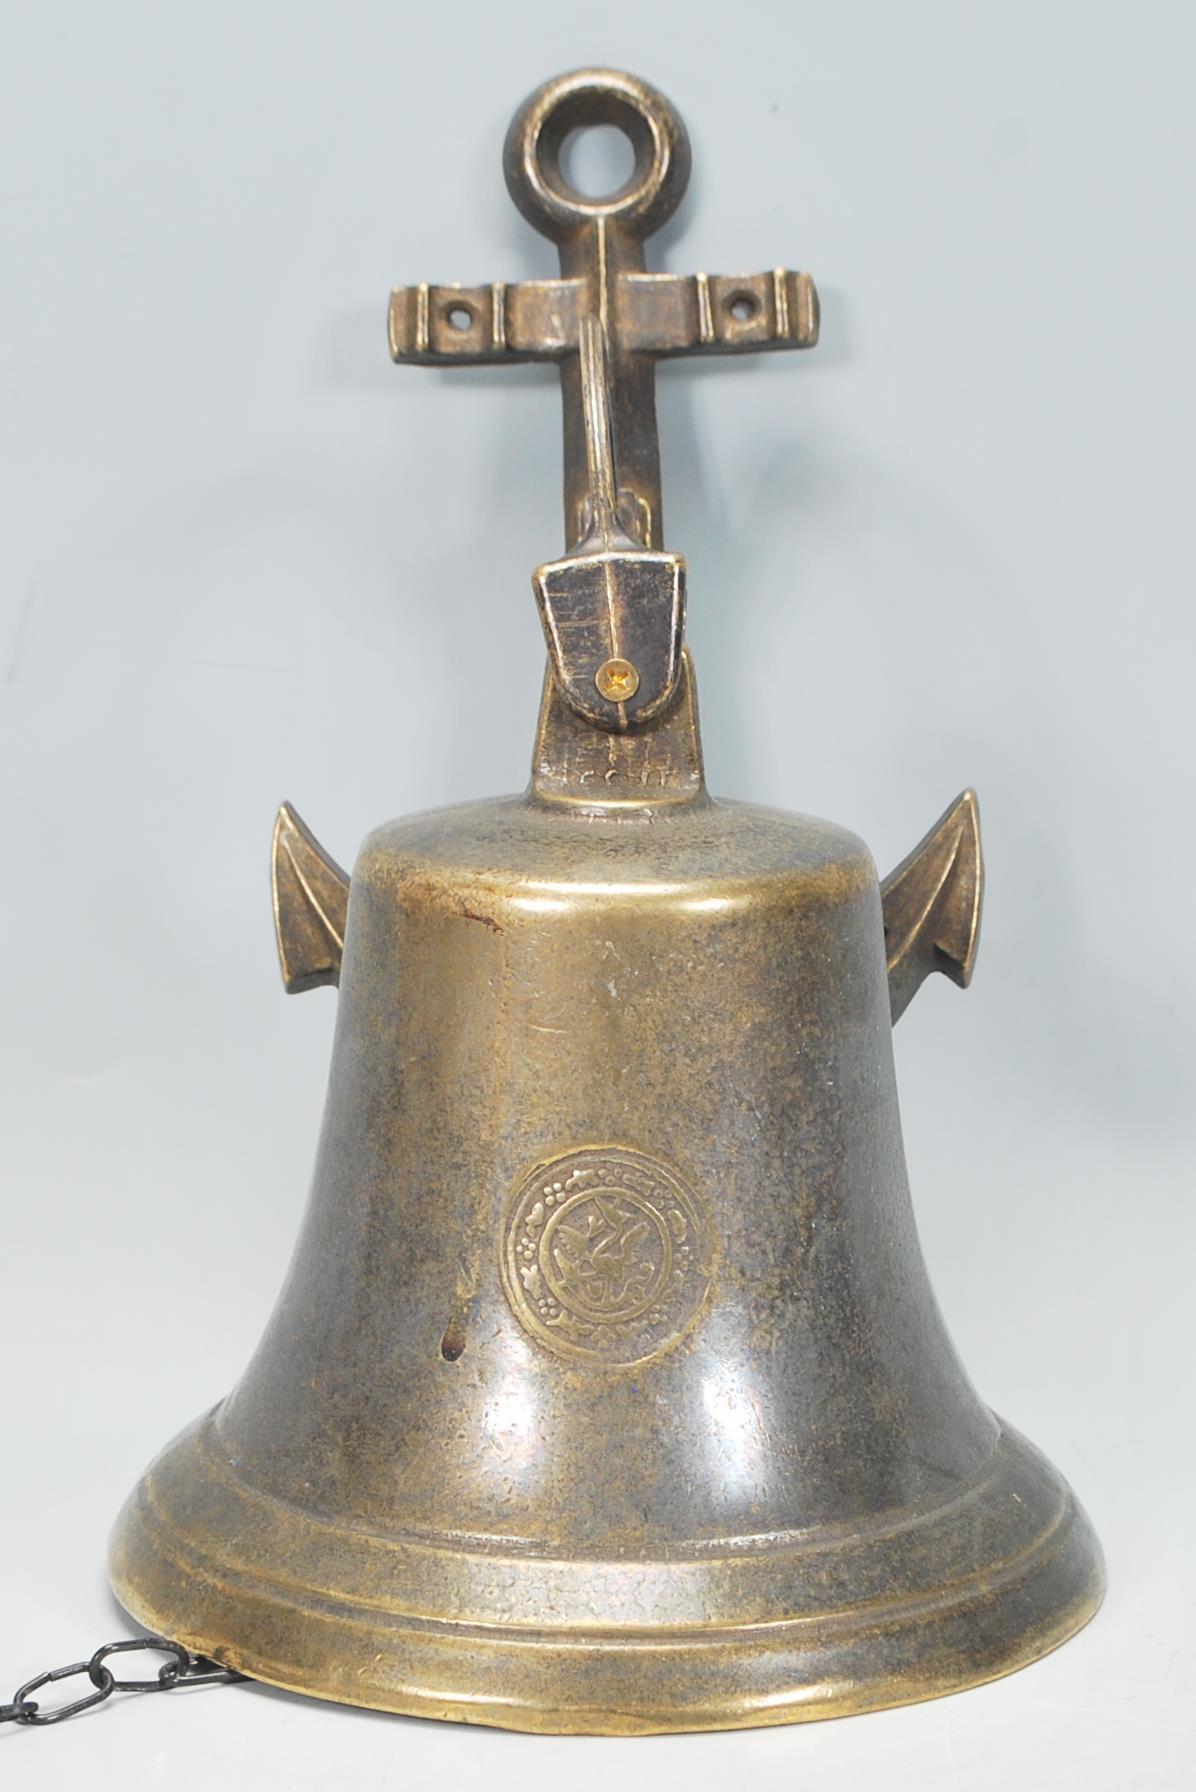 A contemporary novelty brass ships bell / front do